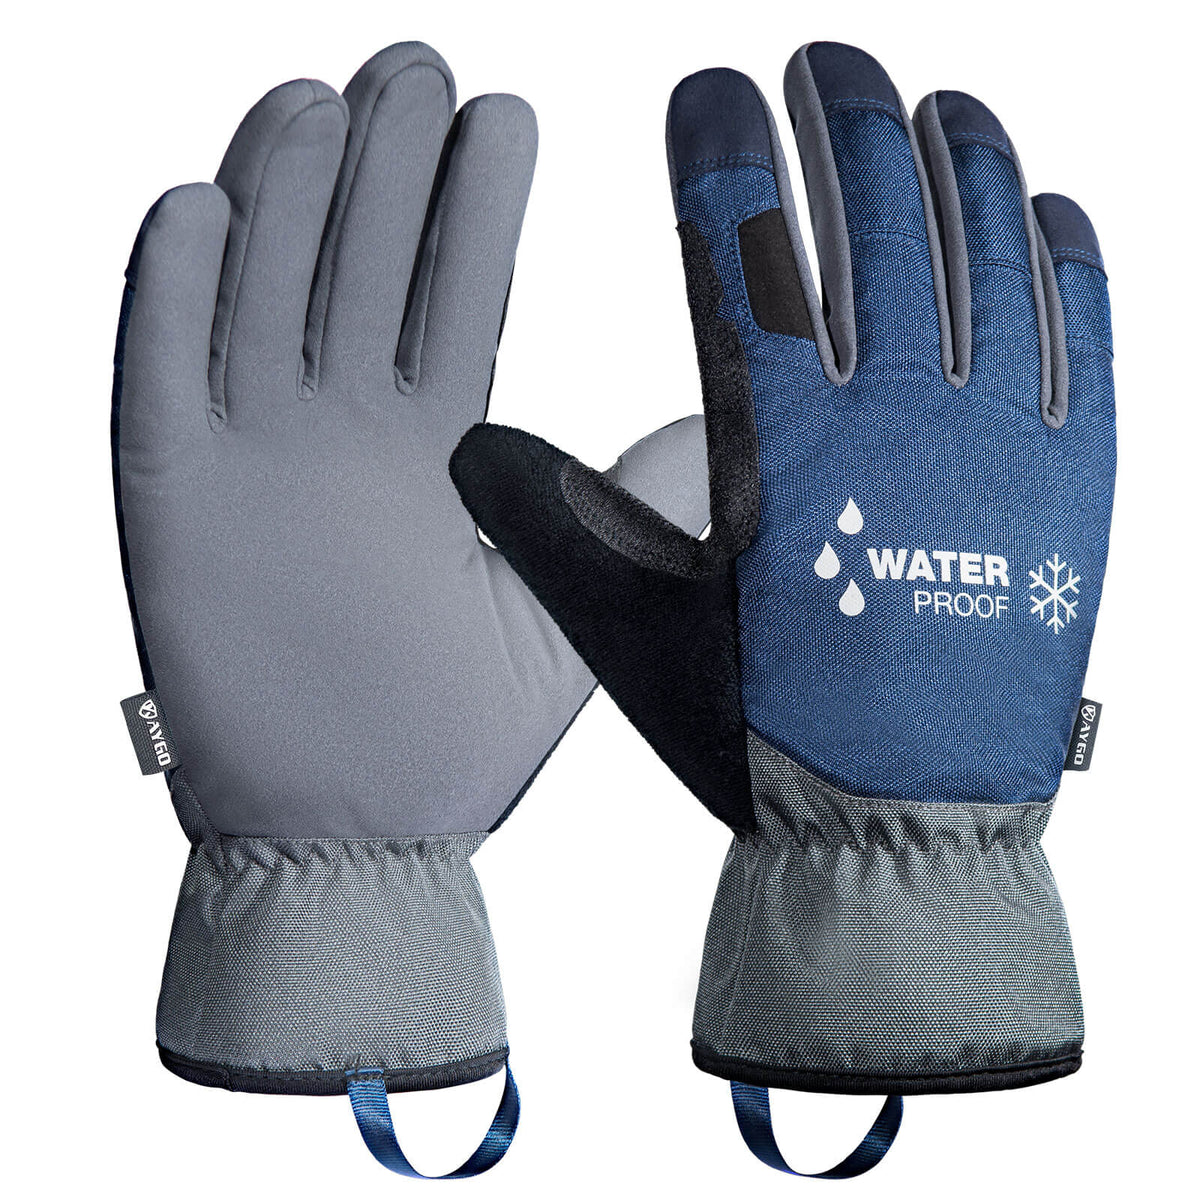 N-180W Micro-foam Nitrile Coated Work Gloves specifically designed